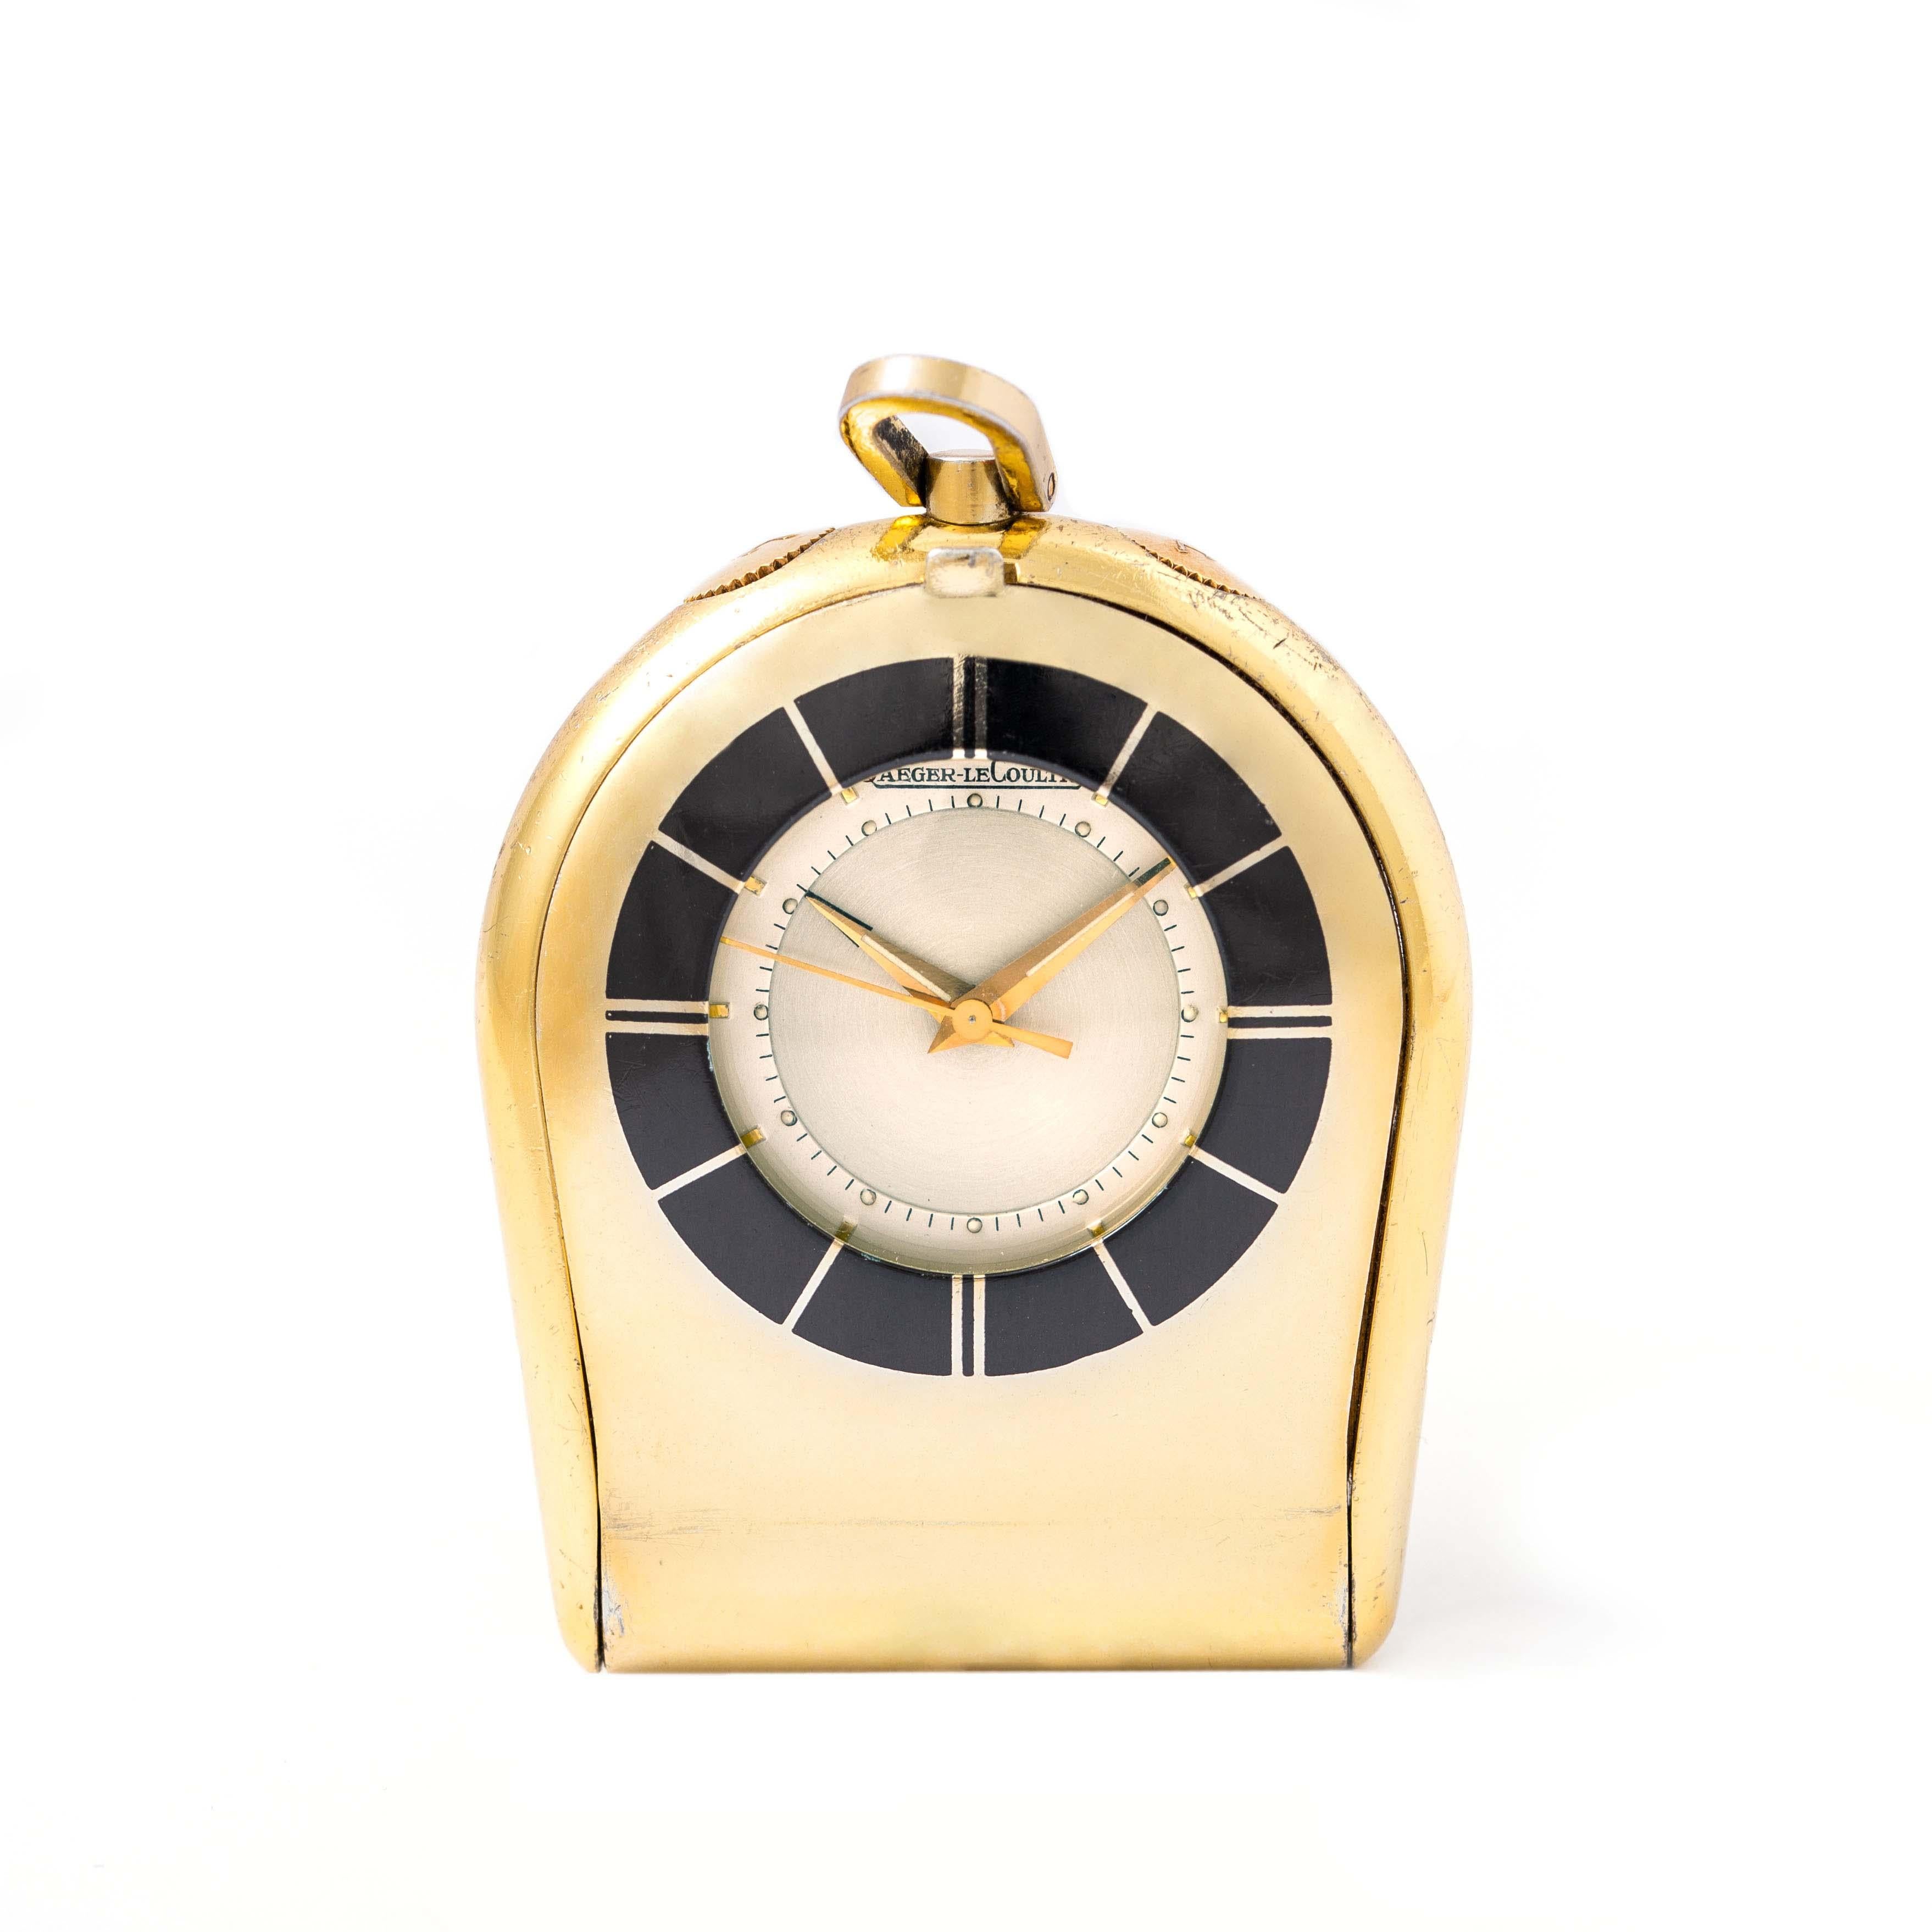 Jaeger-LeCoultre. Gold-plated pocket watch. Signed and numbered. 
Original Jaeger-Lecoultre pouch.
We do not guarantee the movements are working.
Scratches. Length: 4.60 centimeters. Width: 3.60 centimeters. 
Total weight: 40.94 grams.

We do not